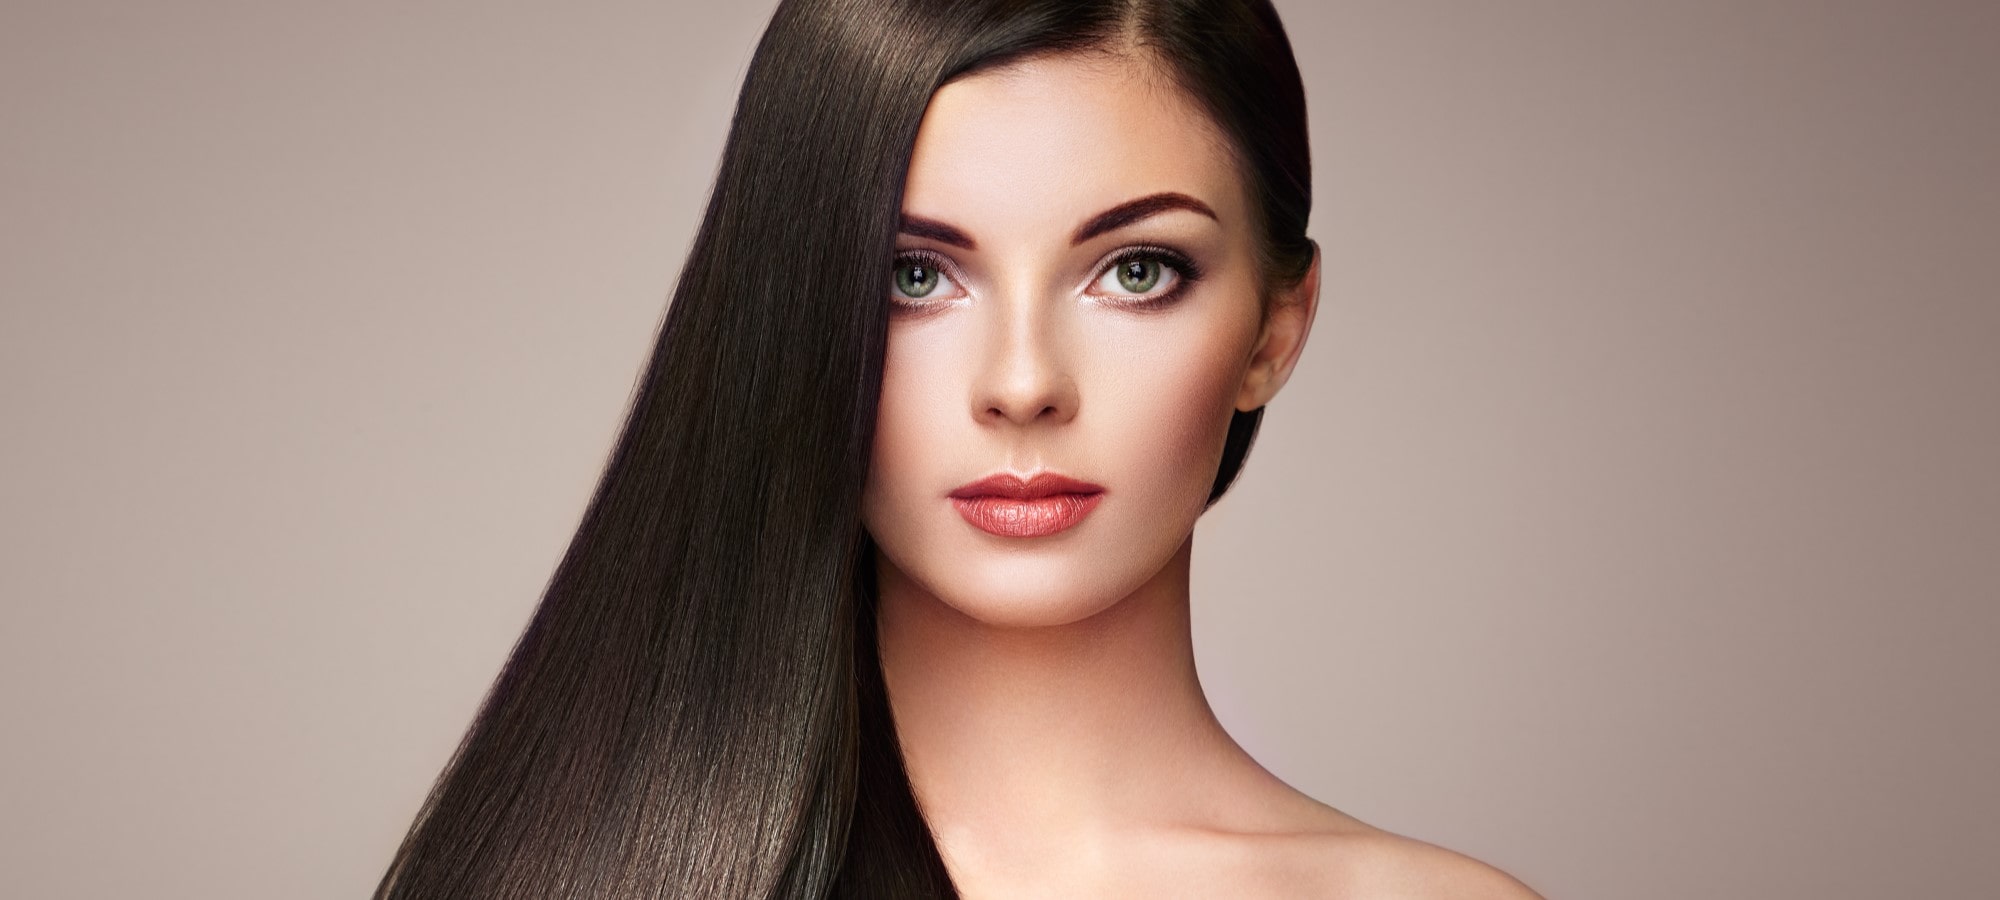 Luxter smoothing hair straightening treatment in Brussels Belgium for women